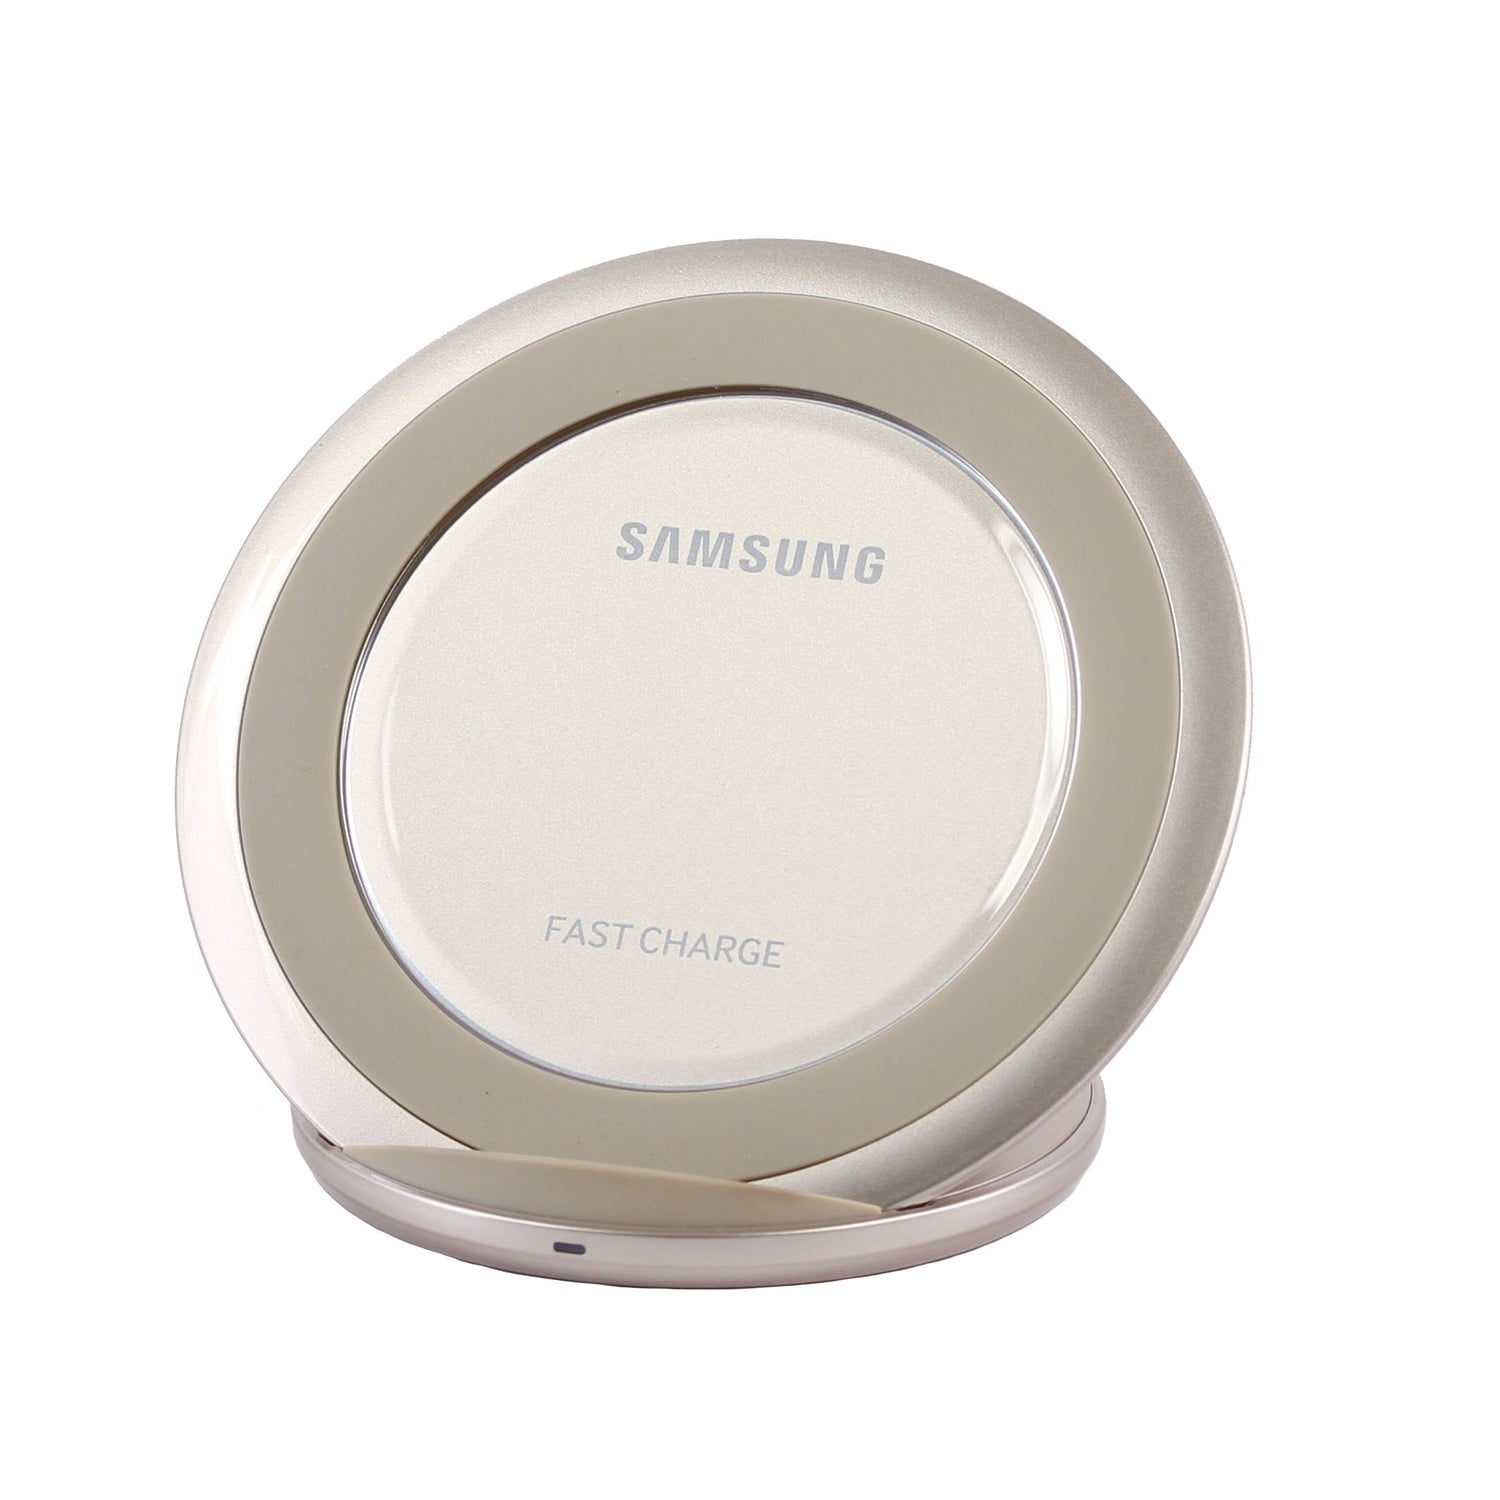 Samsung EP-NG930 Fast Wireless Charging Stand w/ Rapid Charger - Gold (Certified Refurbished)